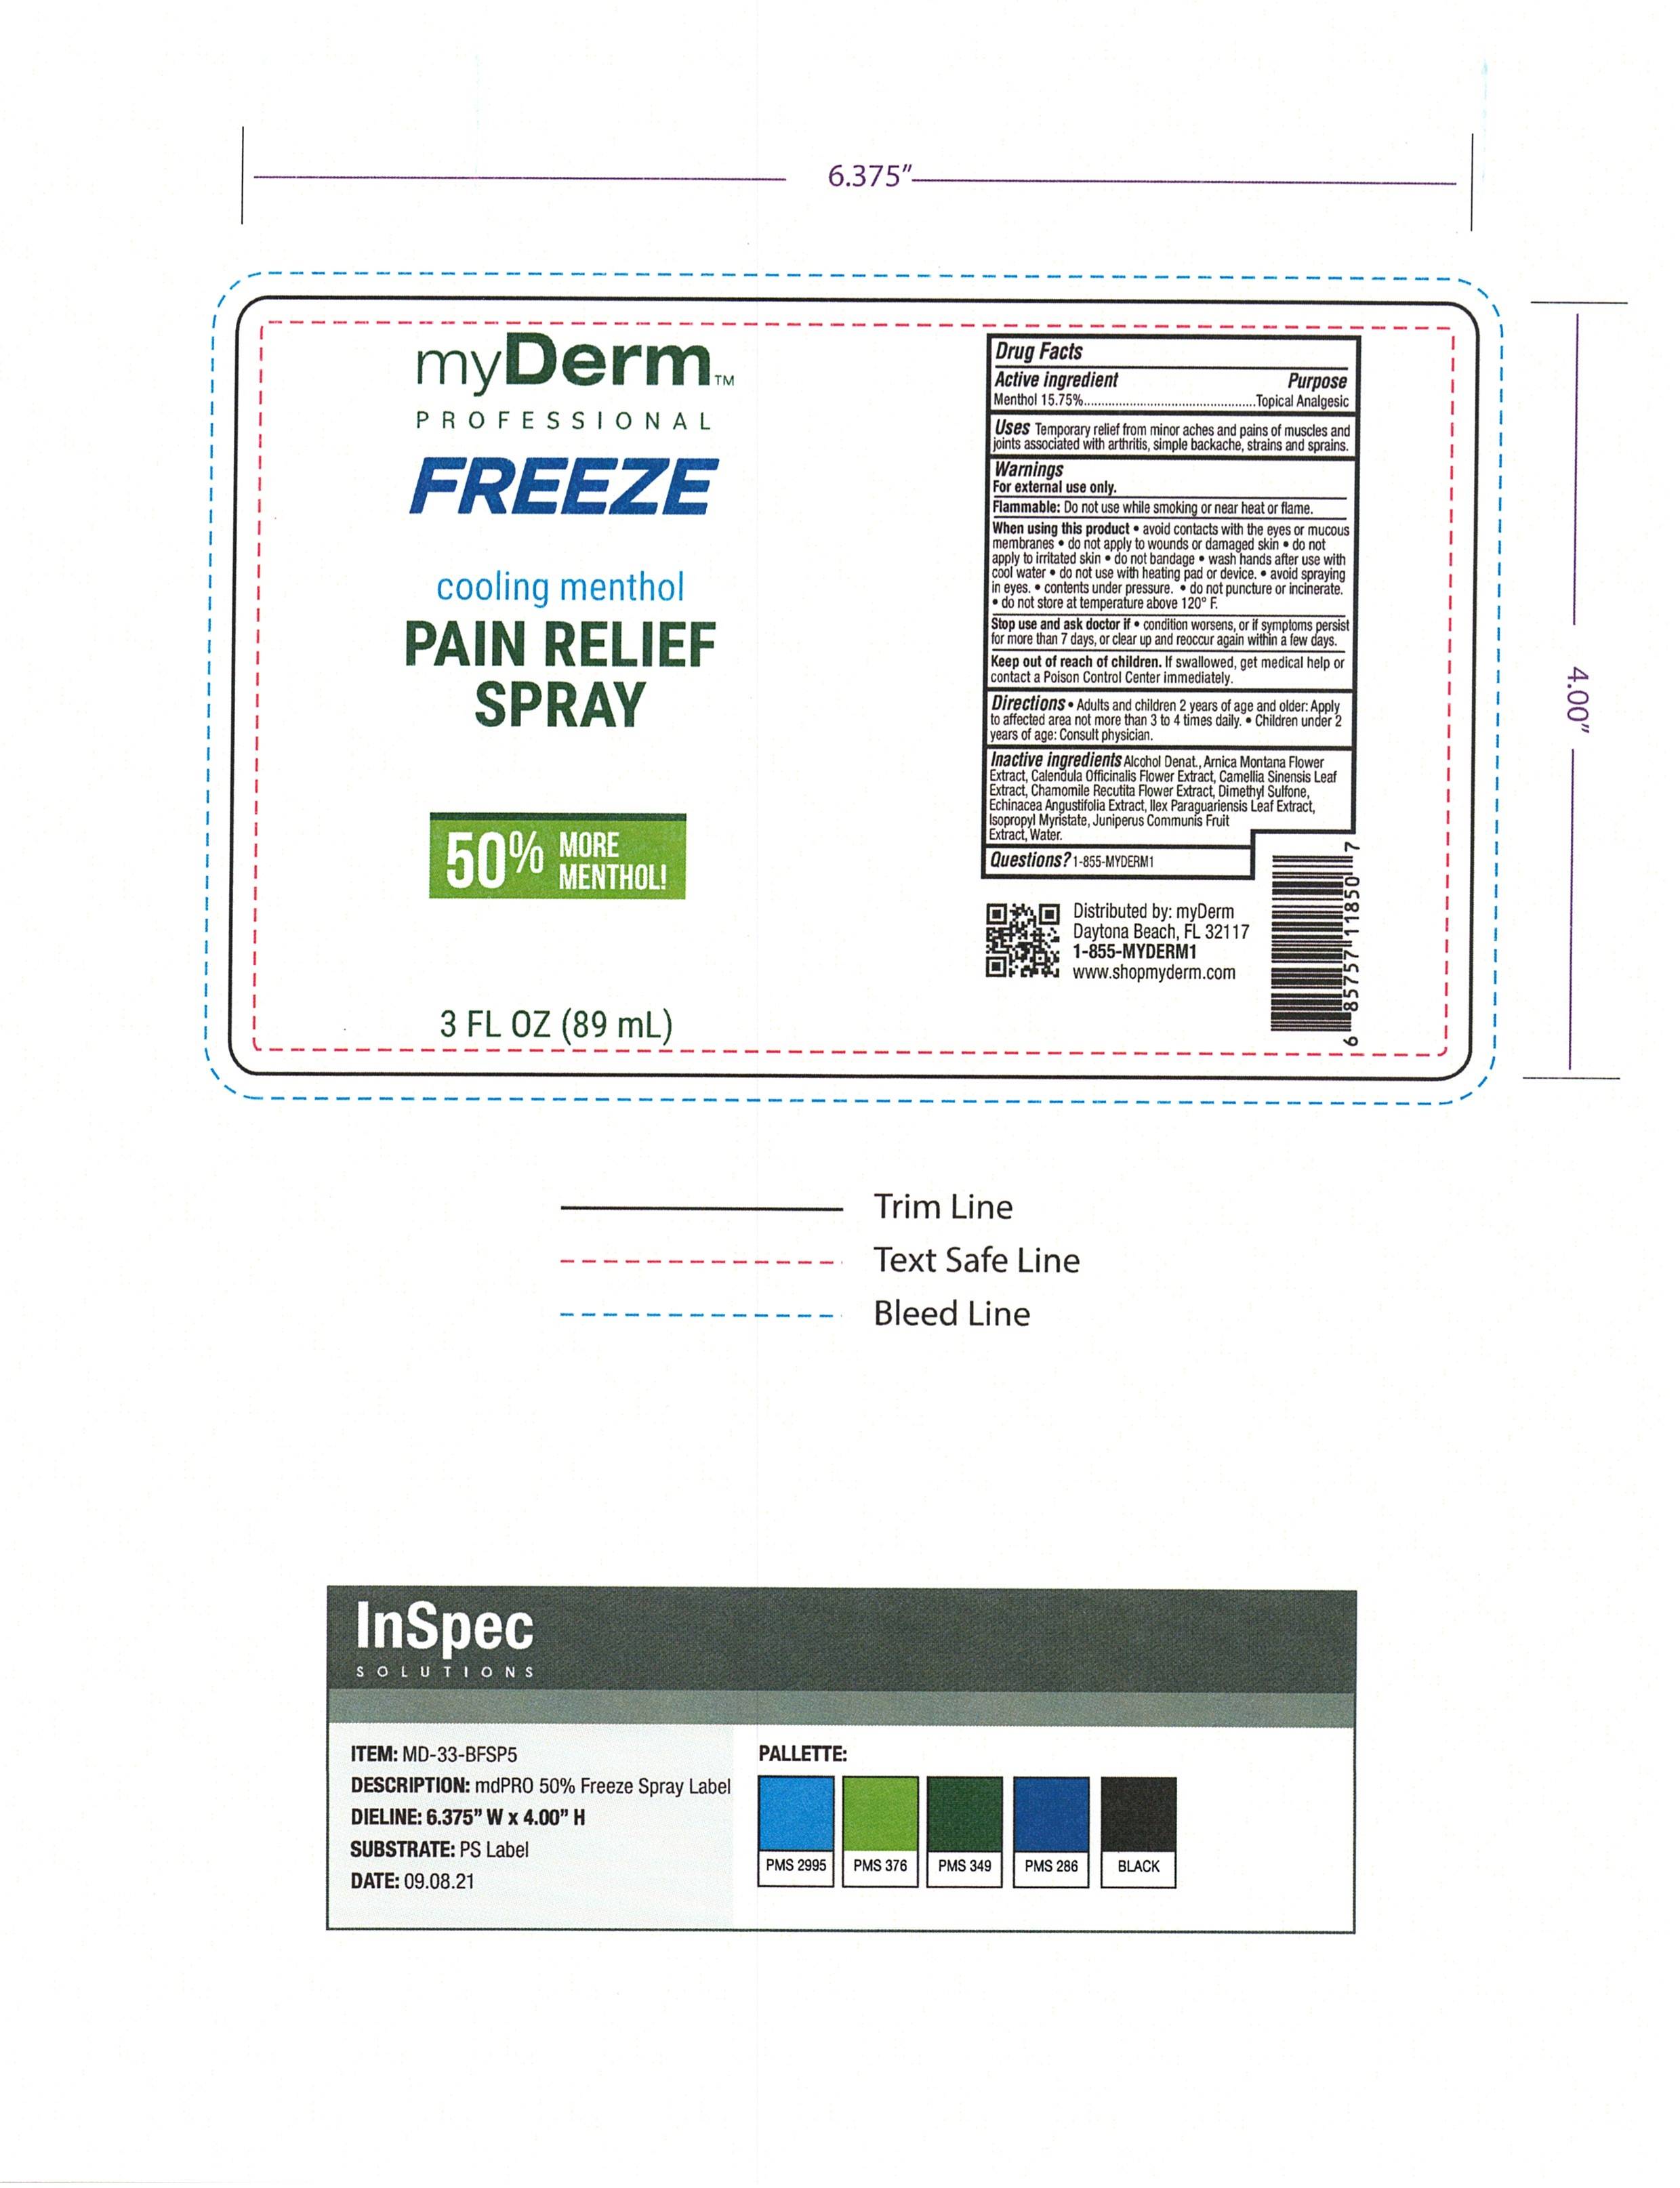 myDerm Cooling Menthol Pain Relief Spray with 50% More Menthol